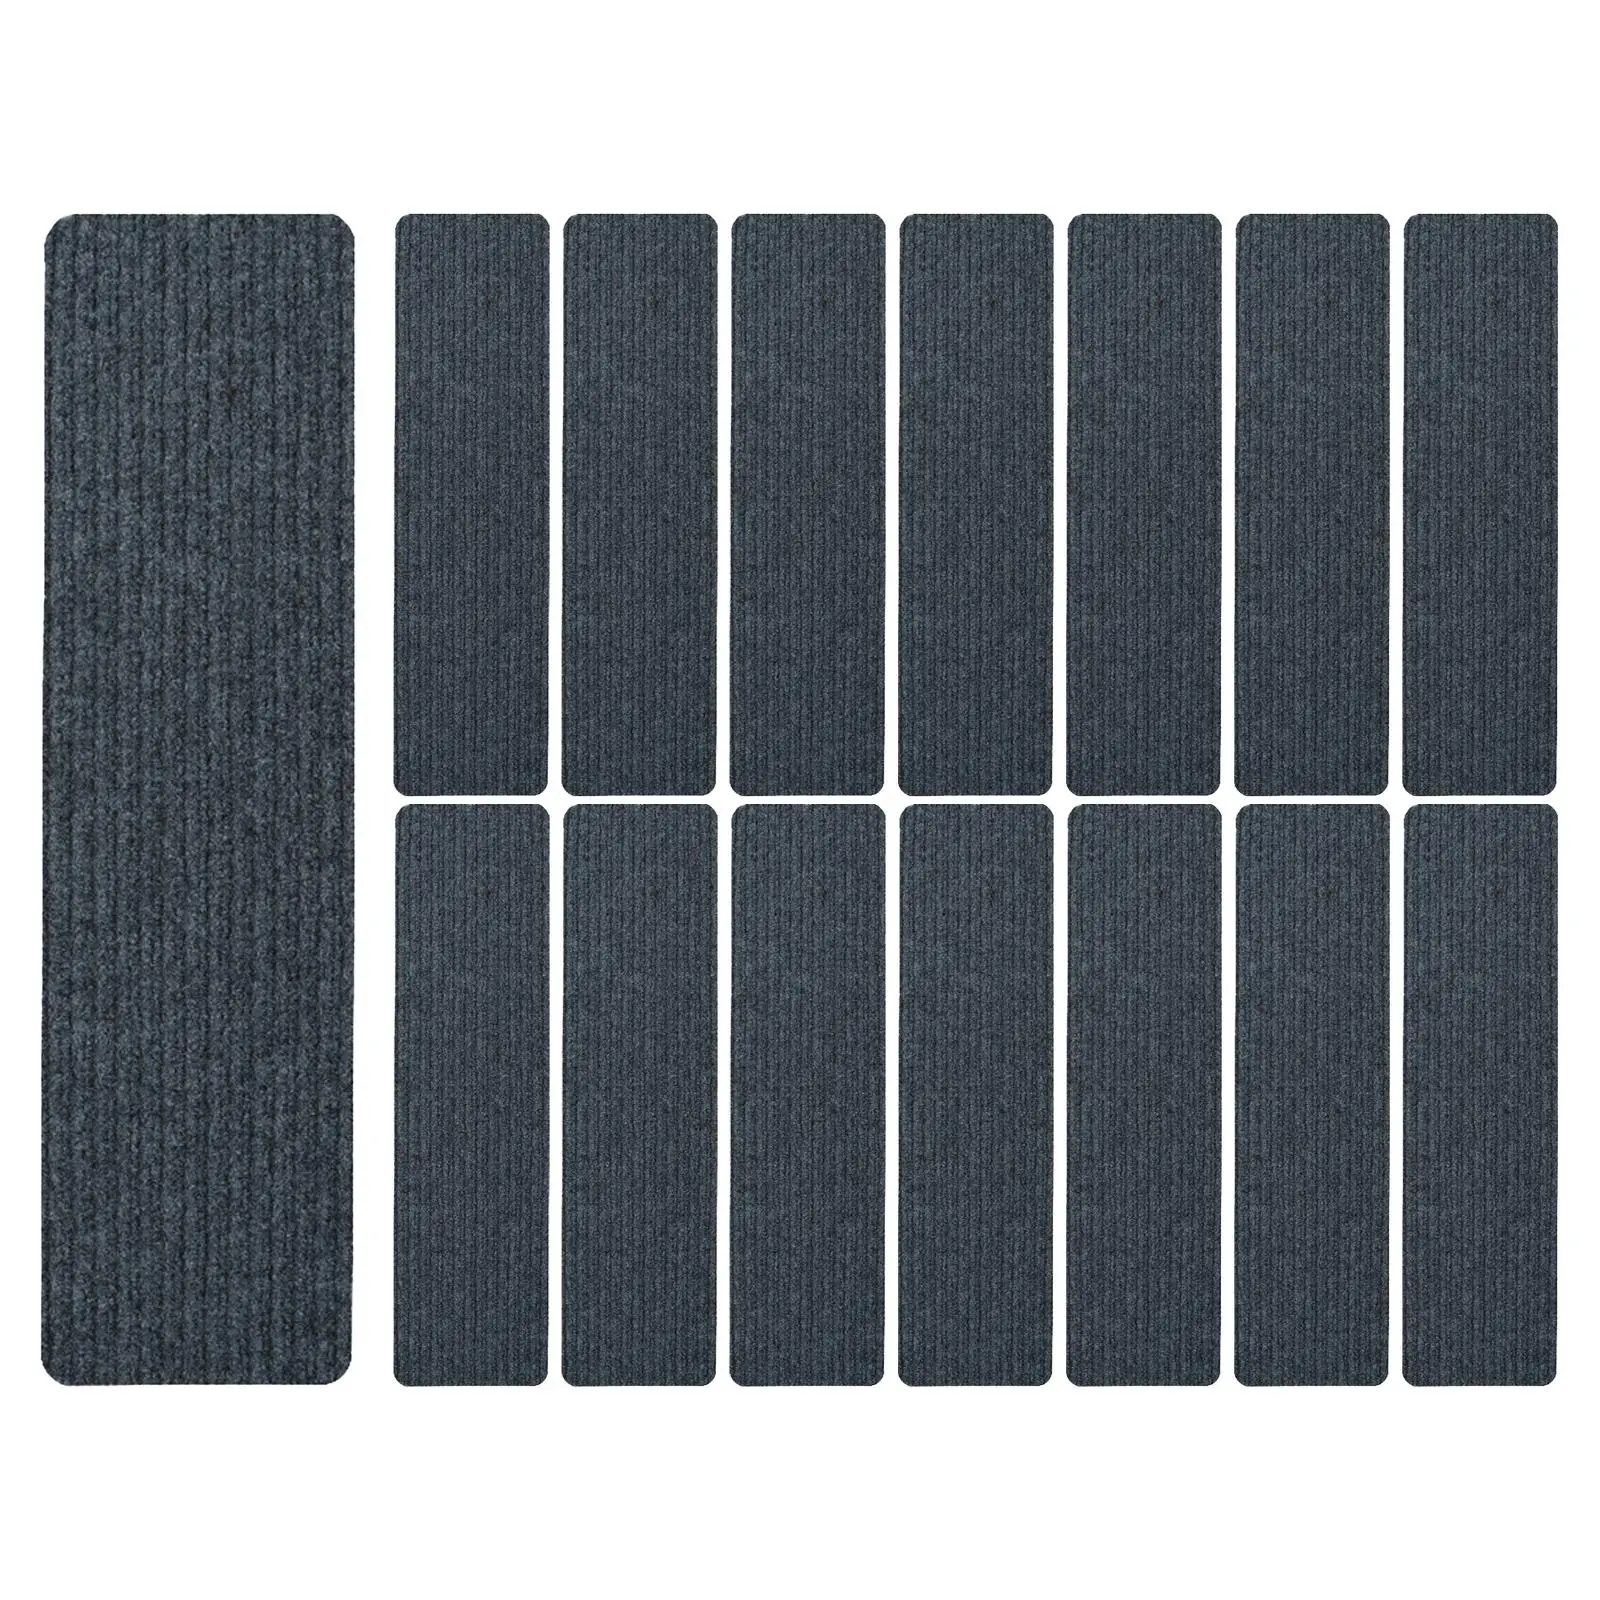 15x Soft Stair Treads, Non Slip Carpet Mat, Indoor Stair Runners for Wooden